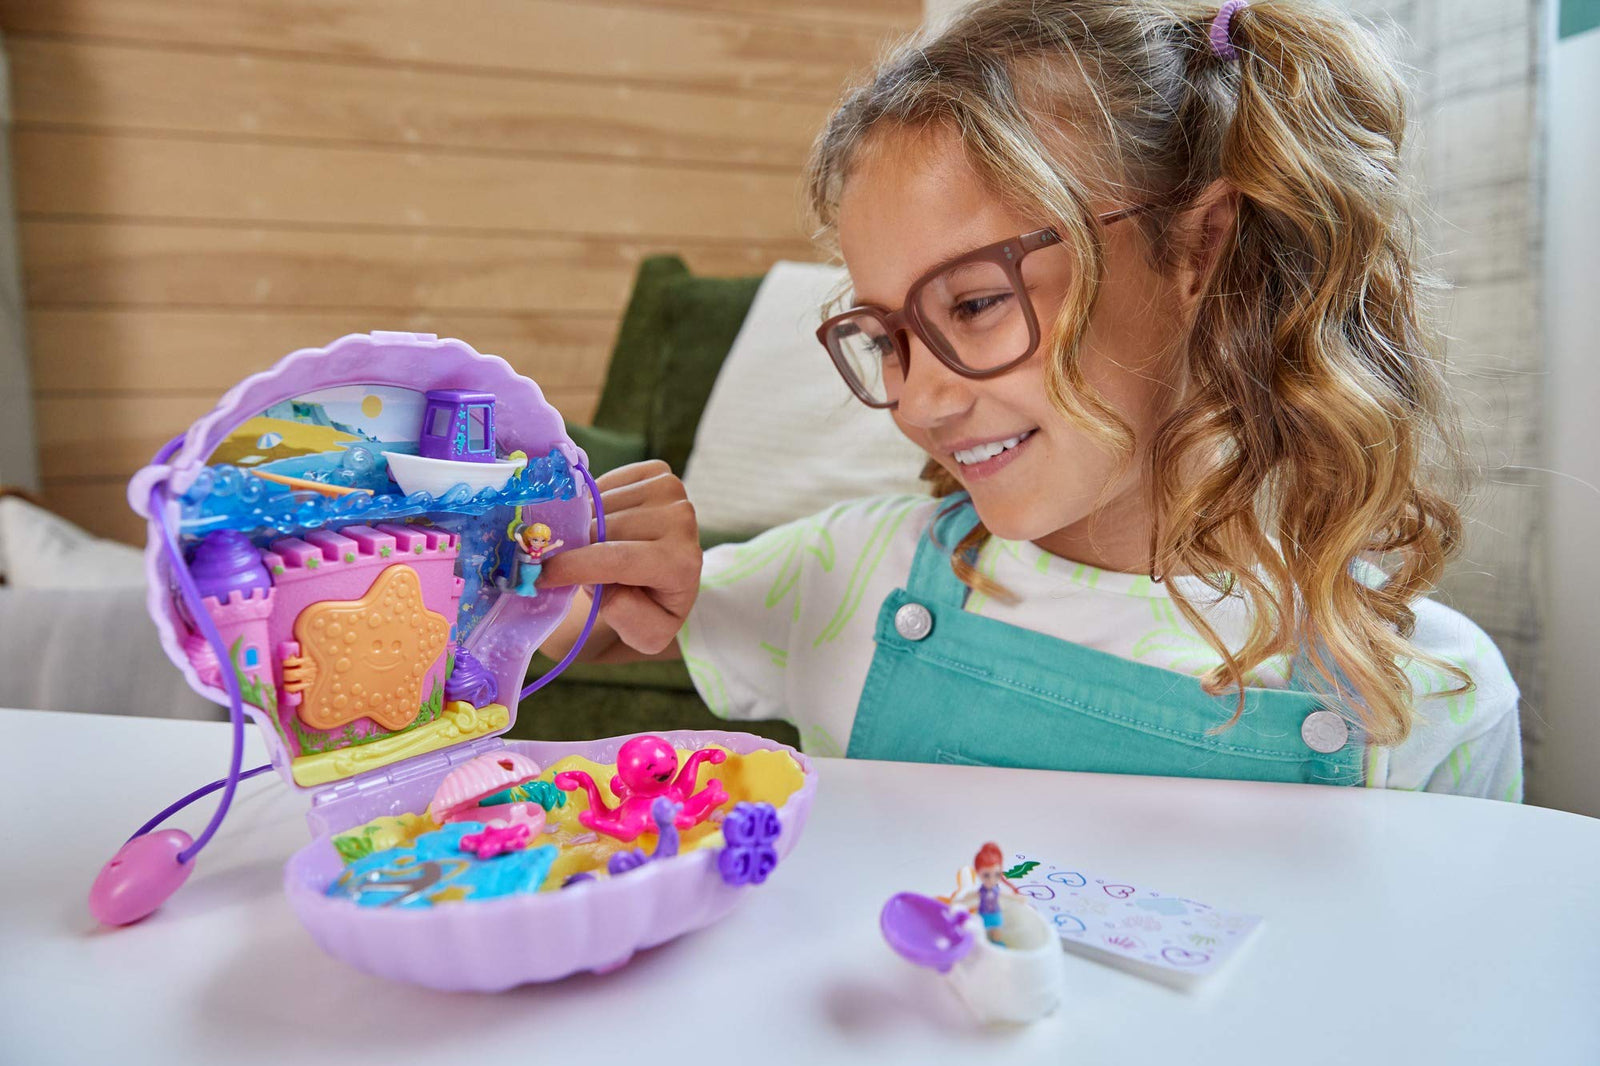 Polly Pocket Tiny Power Seashell Purse Compact with Wearable Strap, Fun Under-The-Sea Features, Micro Polly and Lila Mermaid Dolls, 2 Accessories & Sticker Sheet; for Ages 4 Years Old & Up